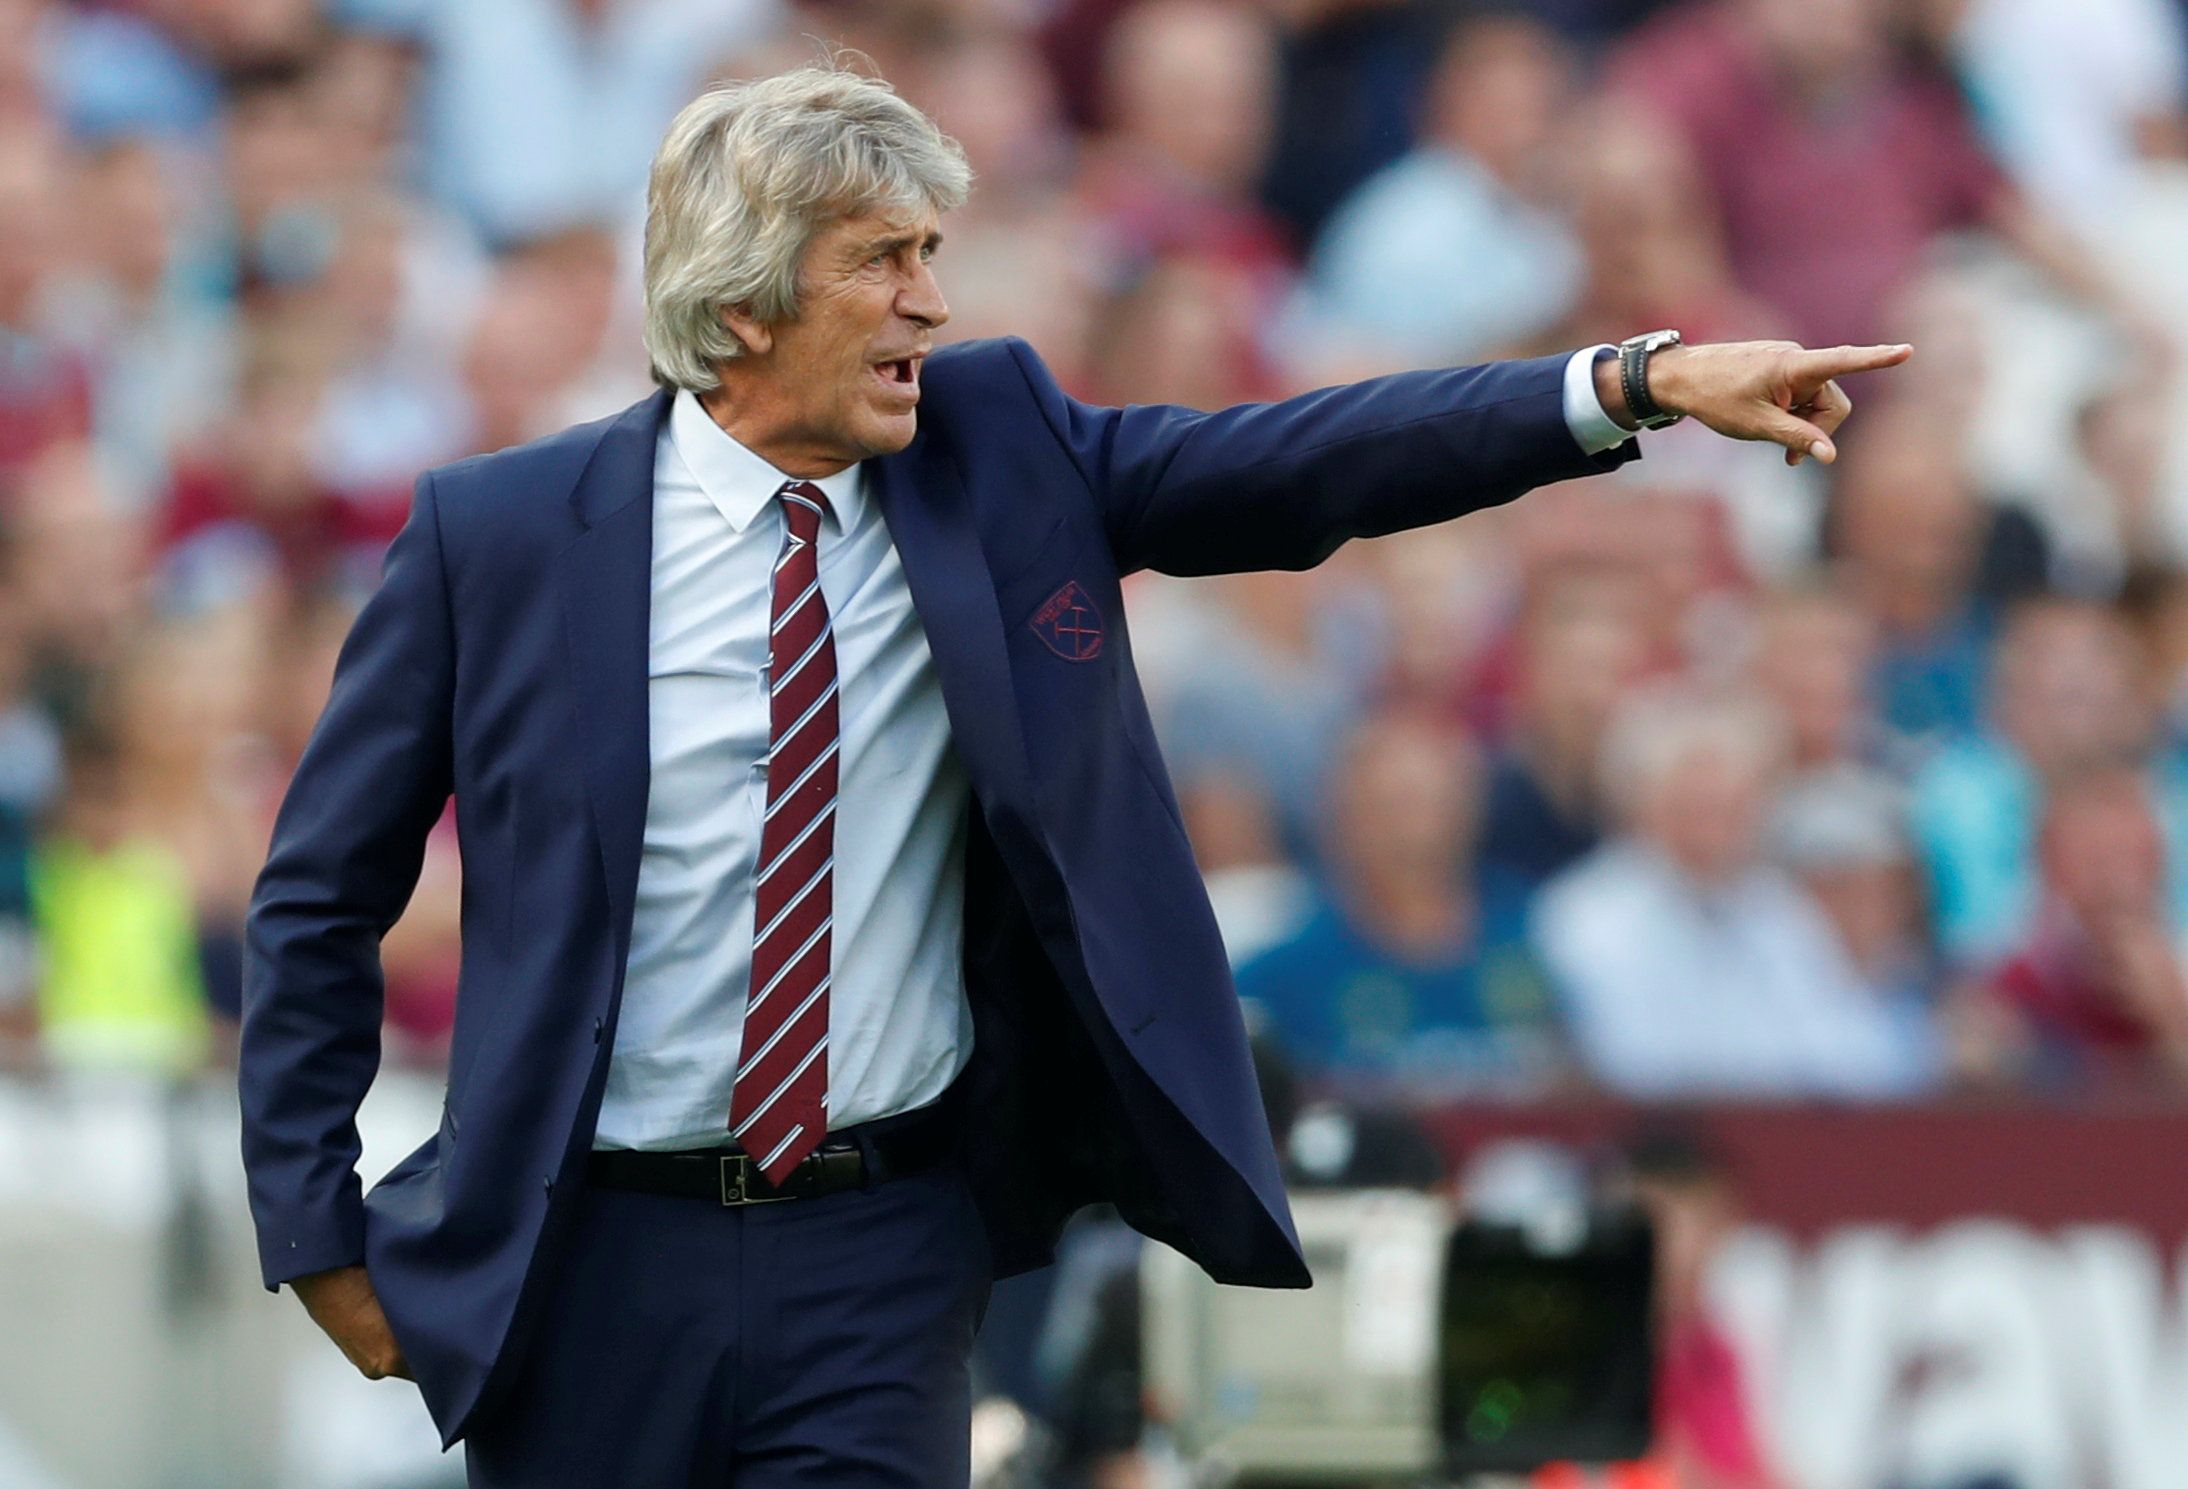 Soccer Football - Premier League - West Ham United v Wolverhampton Wanderers - London Stadium, London, Britain - September 1, 2018  West Ham manager Manuel Pellegrini gestures               Action Images via Reuters/Matthew Childs  EDITORIAL USE ONLY. No use with unauthorized audio, video, data, fixture lists, club/league logos or 